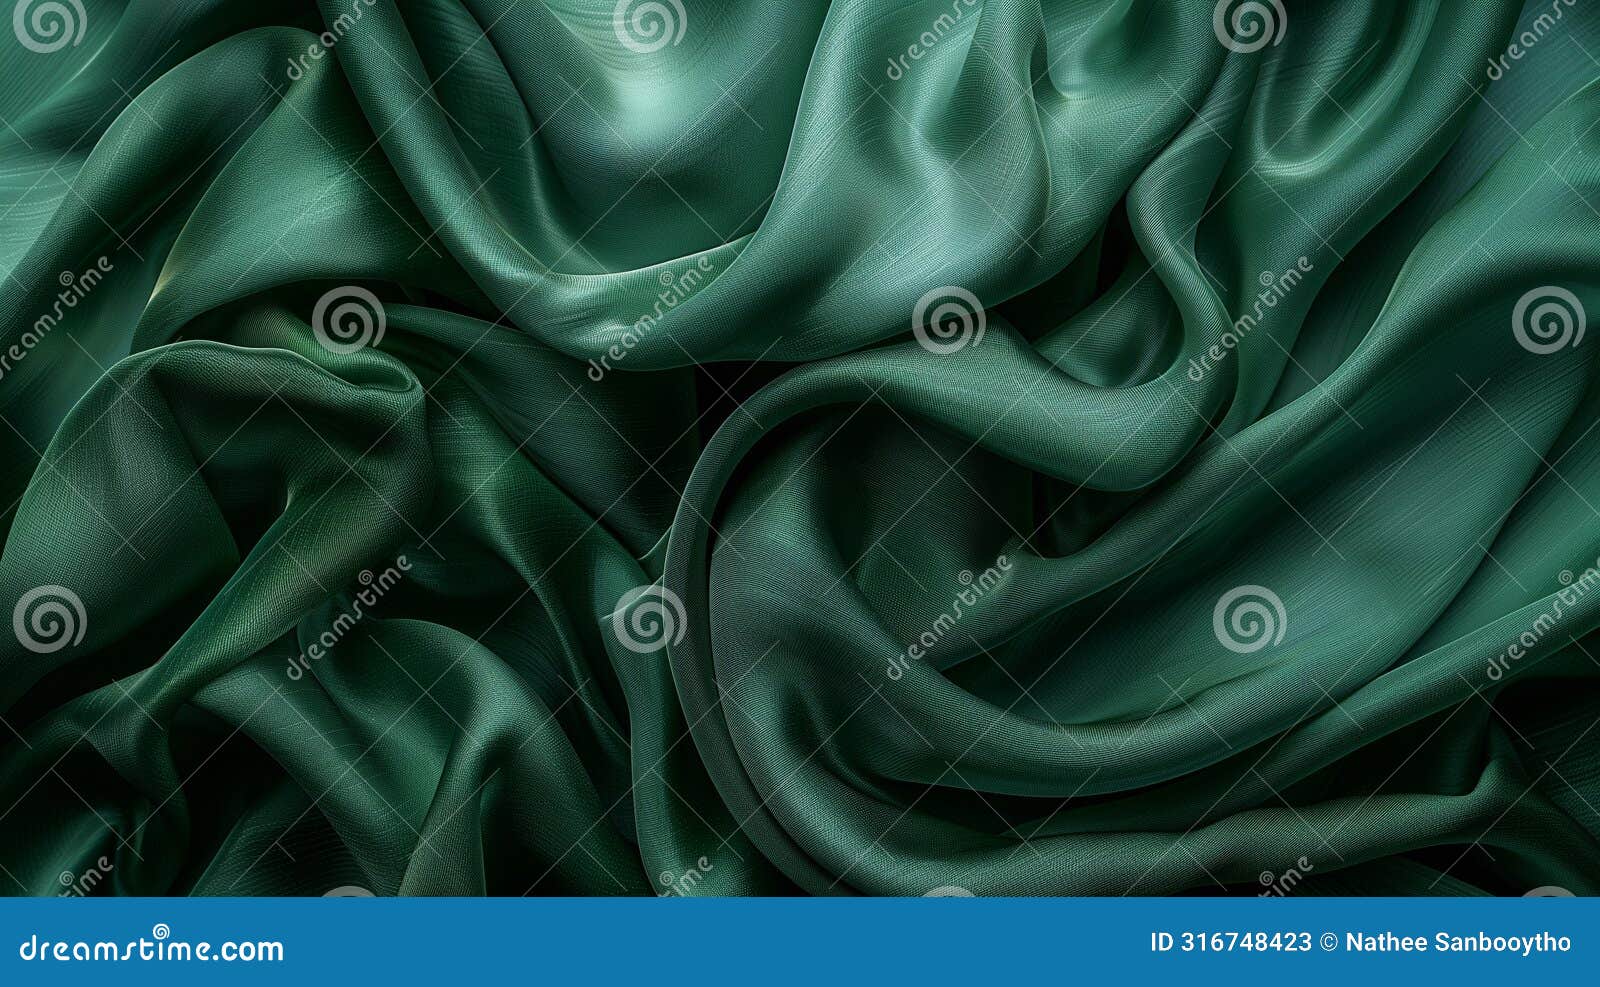 vivid green satin textile with gentle folds